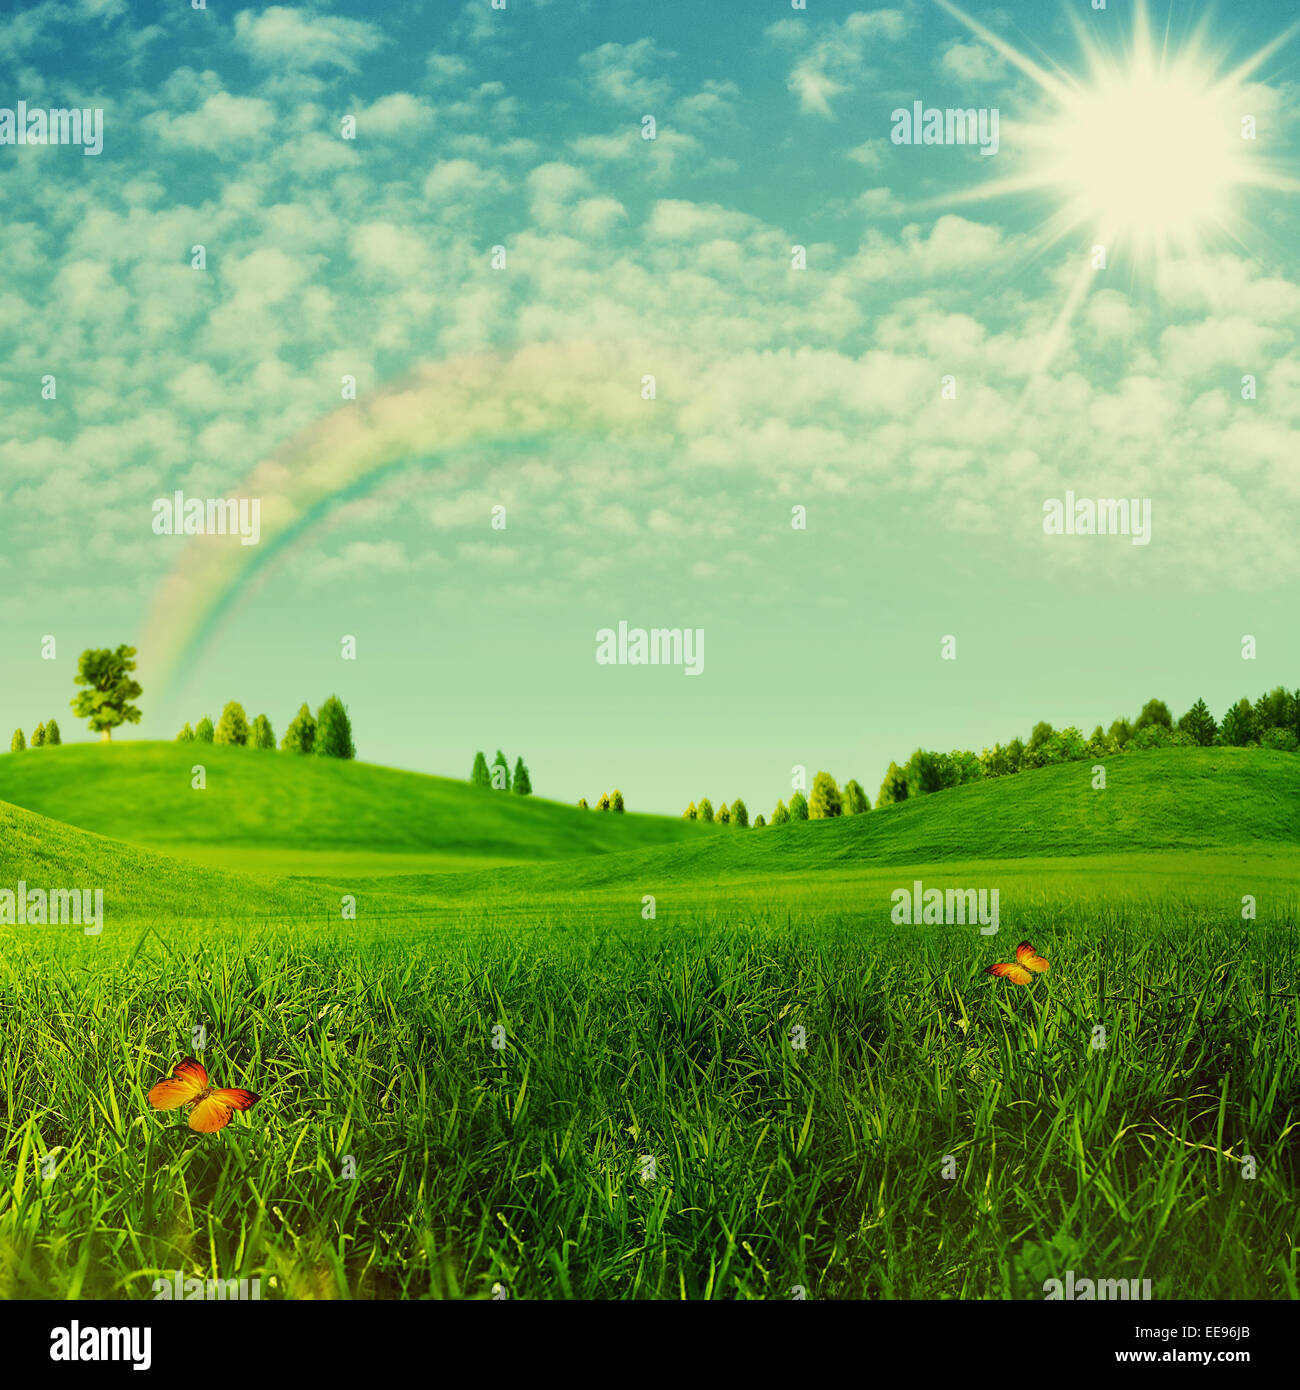 Beauty environmental backgrounds for your design Stock Photo